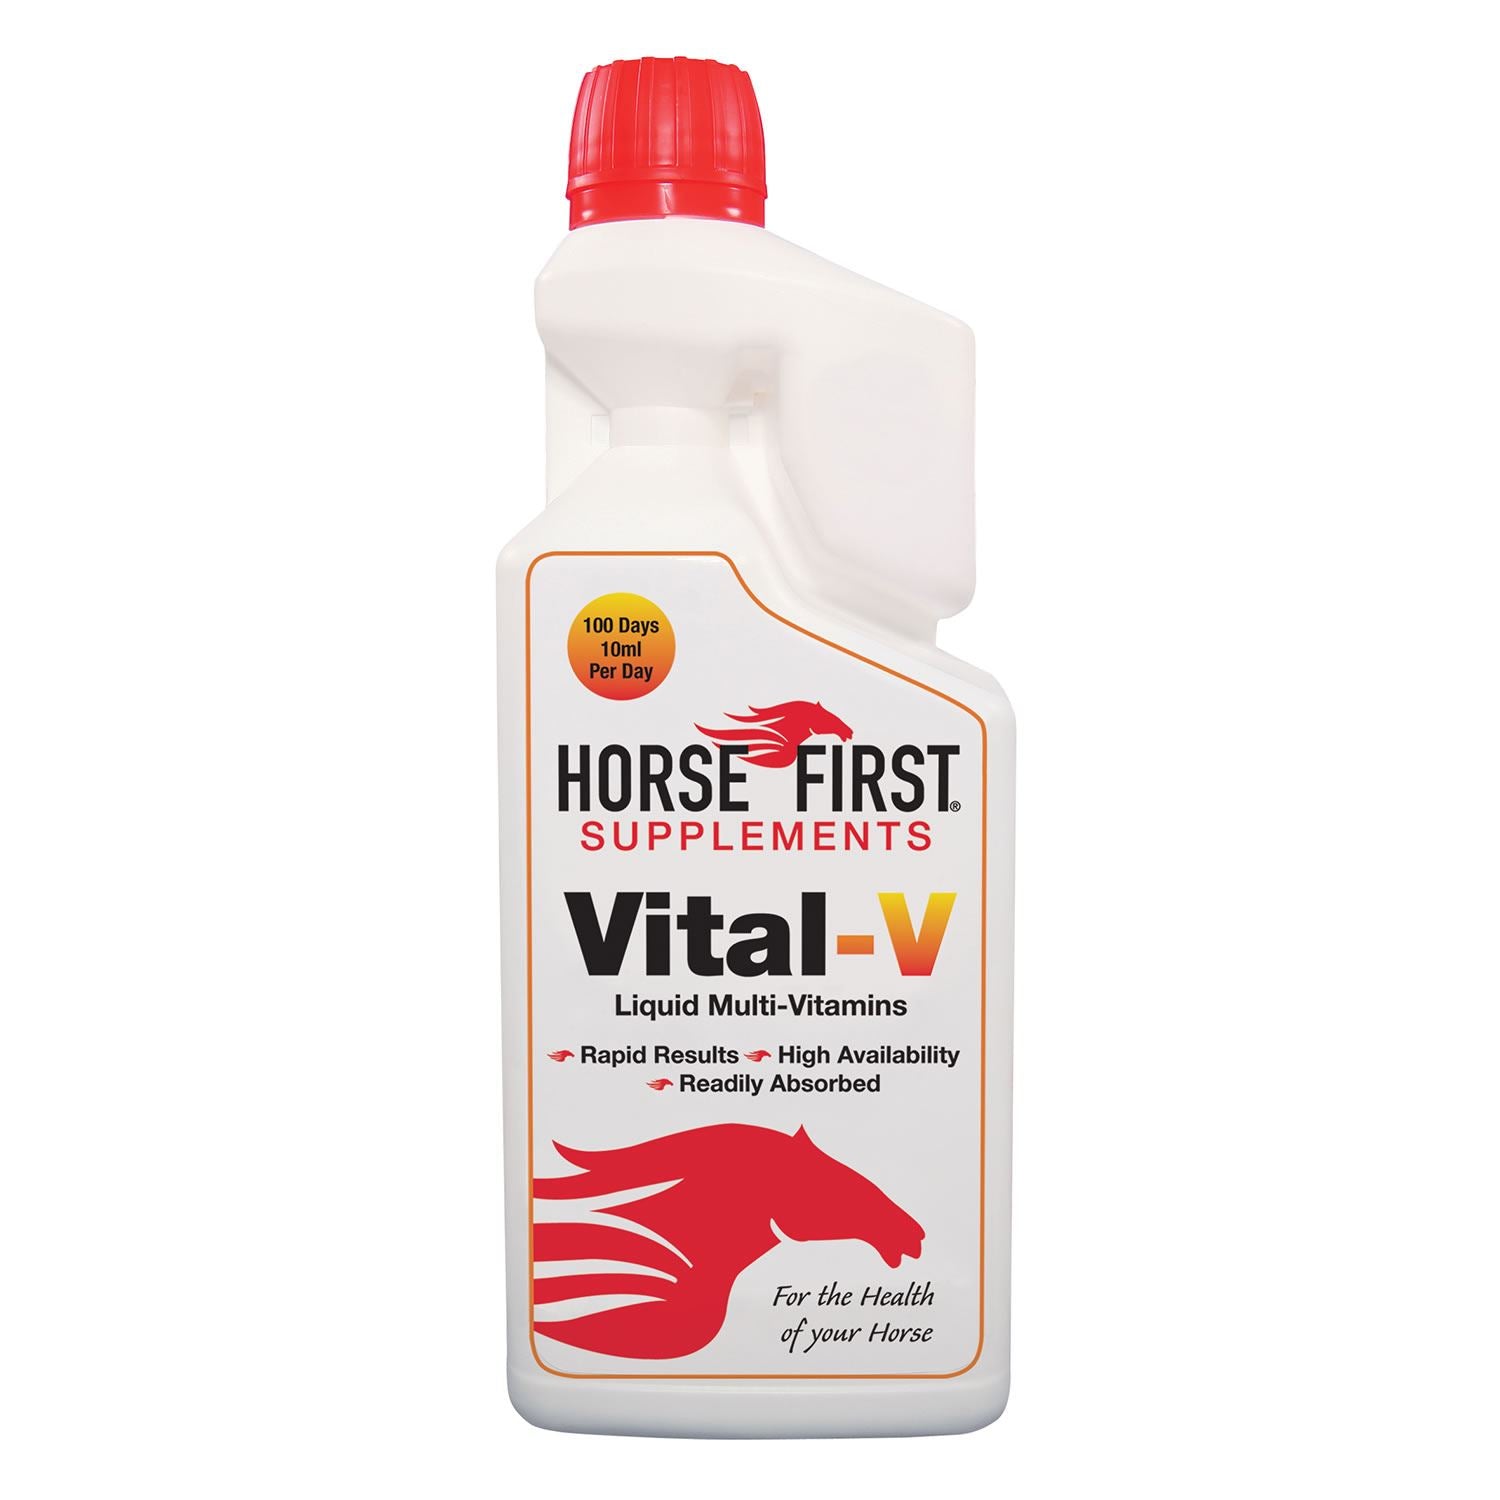 Horse First Vital-V - Just Horse Riders